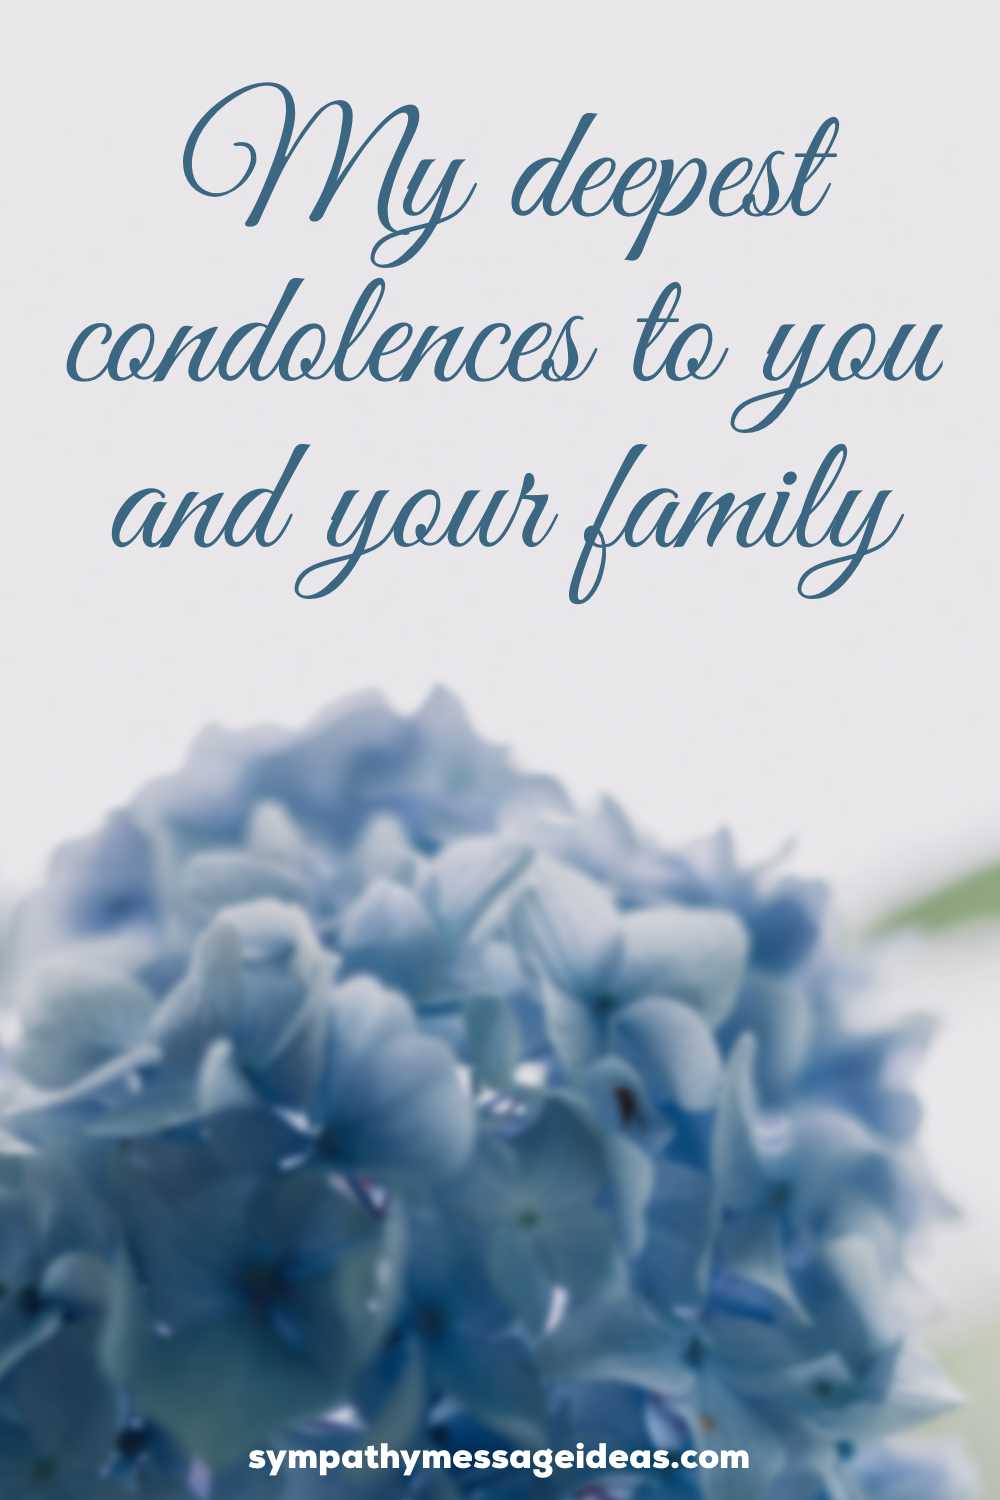 80 Heartfelt Condolence Messages And Quotes Wishesmsg